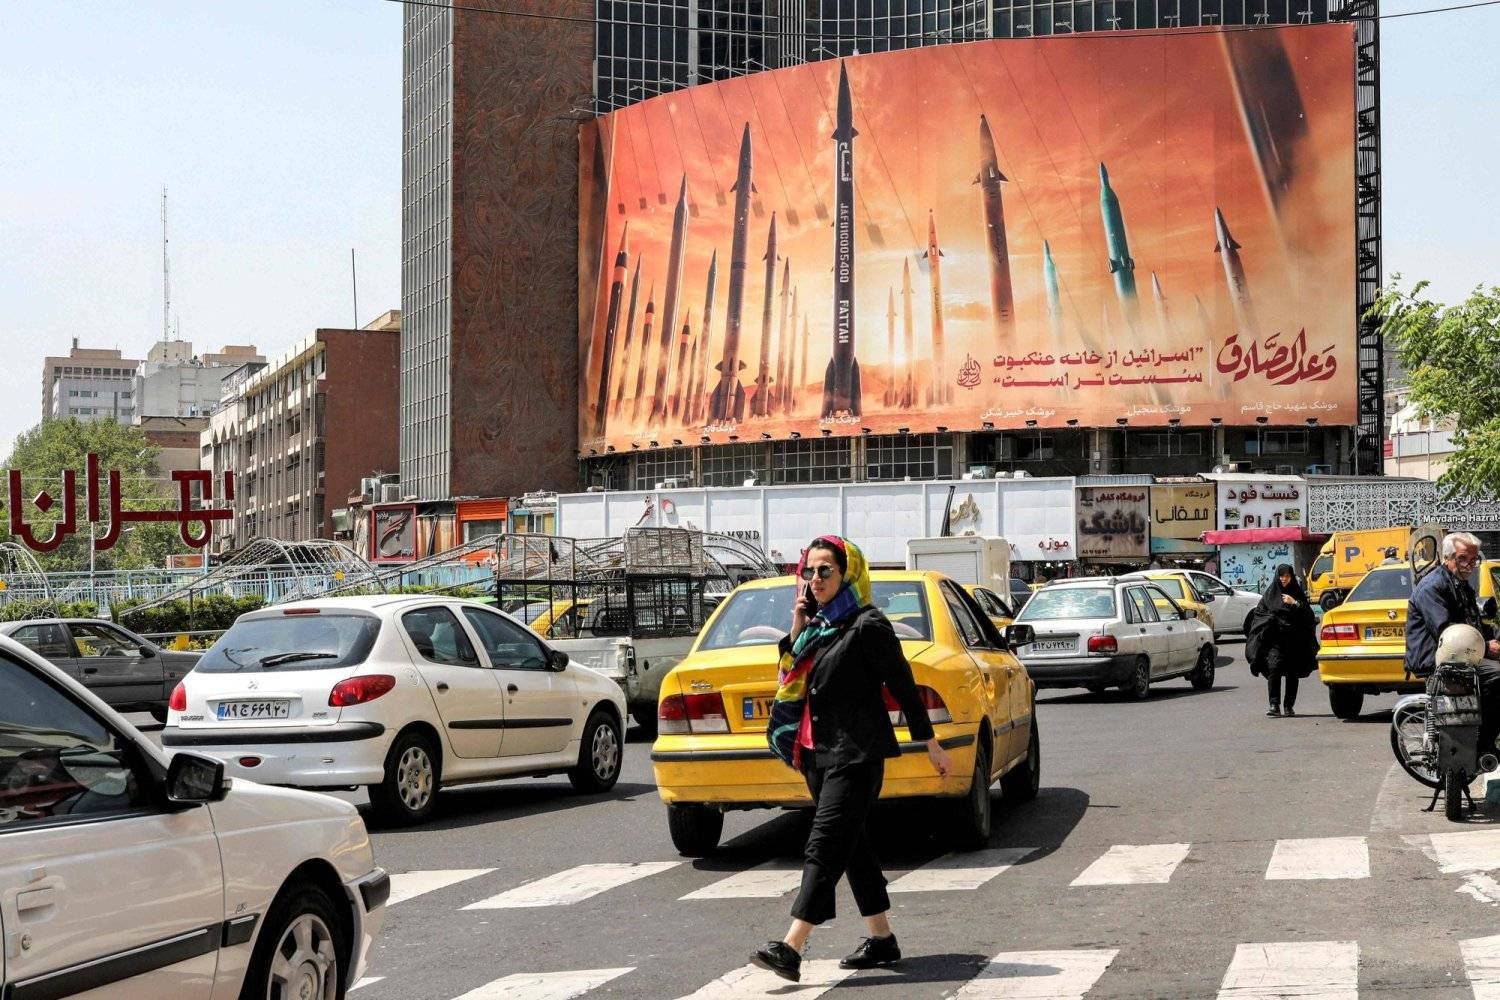 A billboard depicting Iranian ballistic missiles and reading “The True Promise”, in Vali Asr Square in central Tehran (AFP)